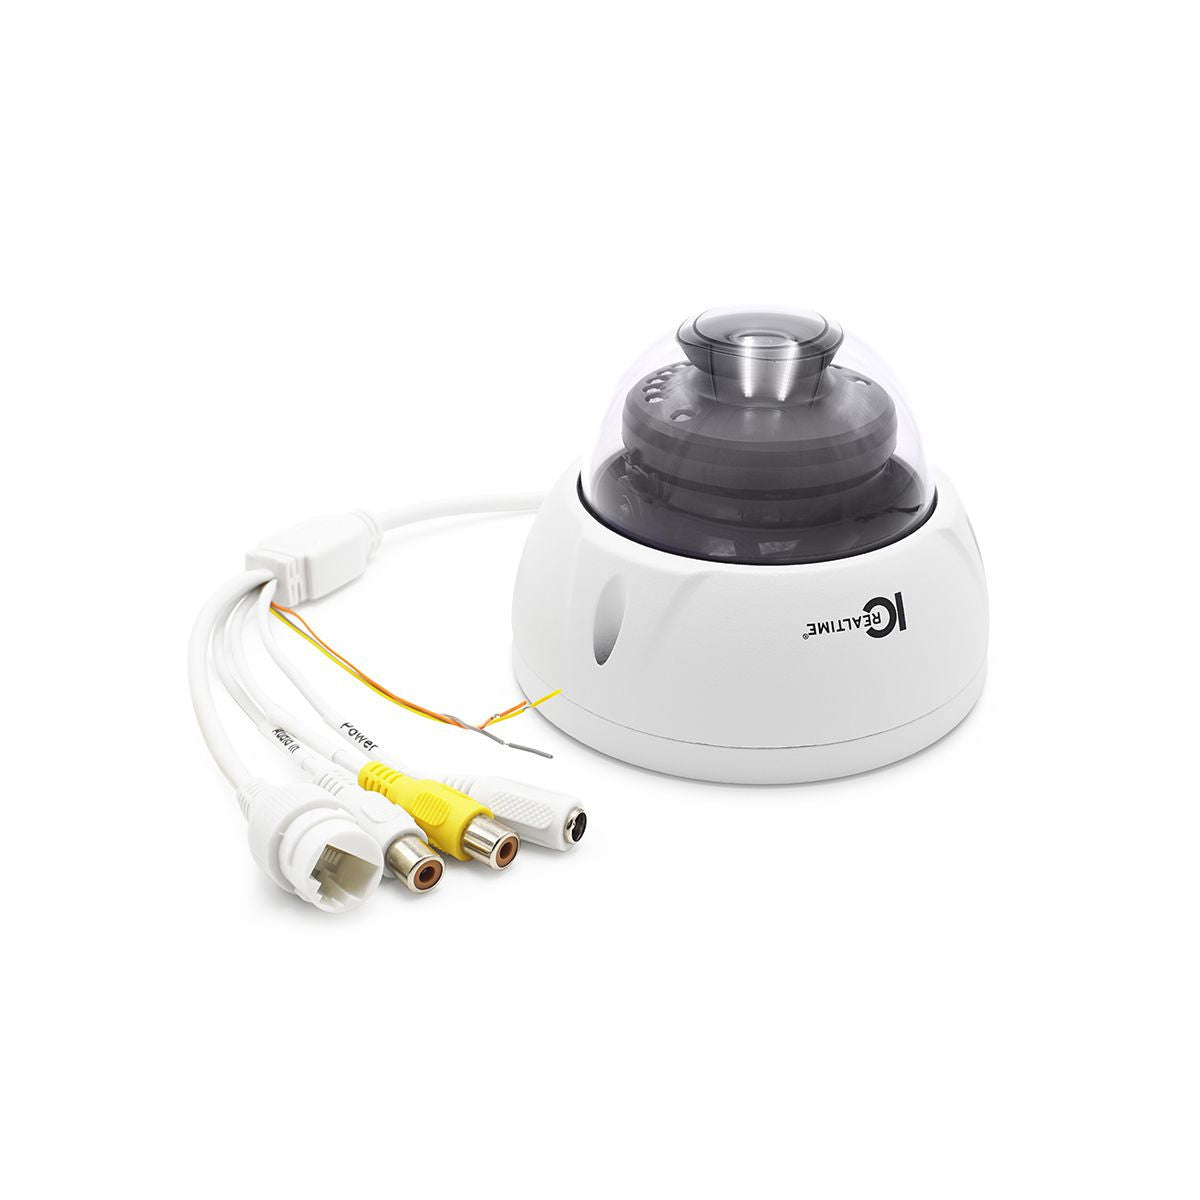 IPMXD40FIRW2 4MP IP Ind/Out Small Size Vandal Dome Fixed 28mm Lens 104 98 ft Smart IR Tnted Dome POE AI